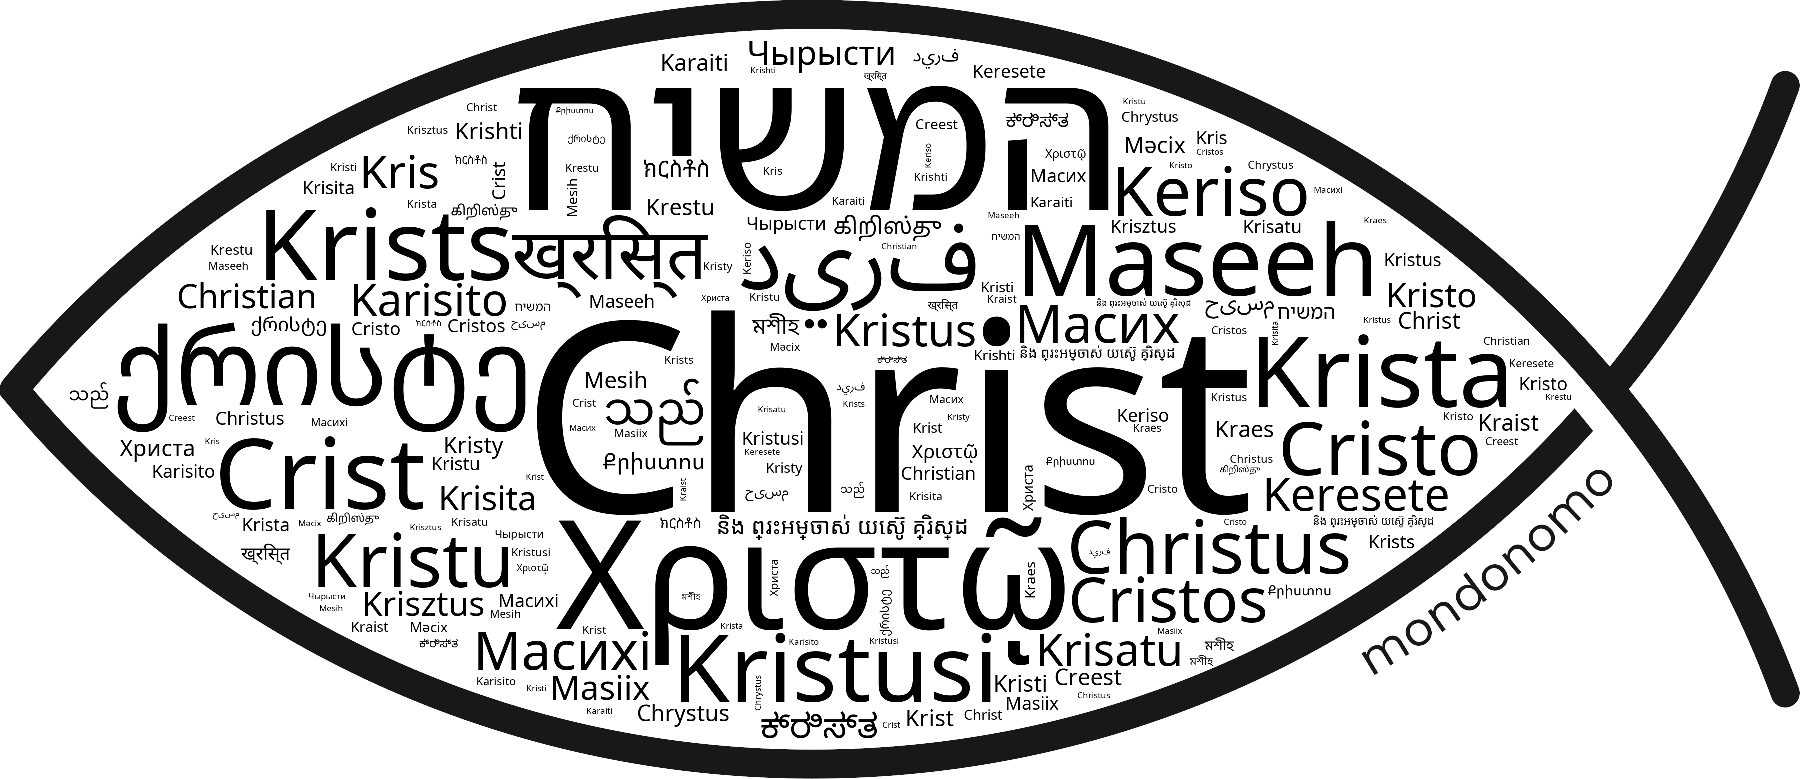 Name Christ in the world's Bibles